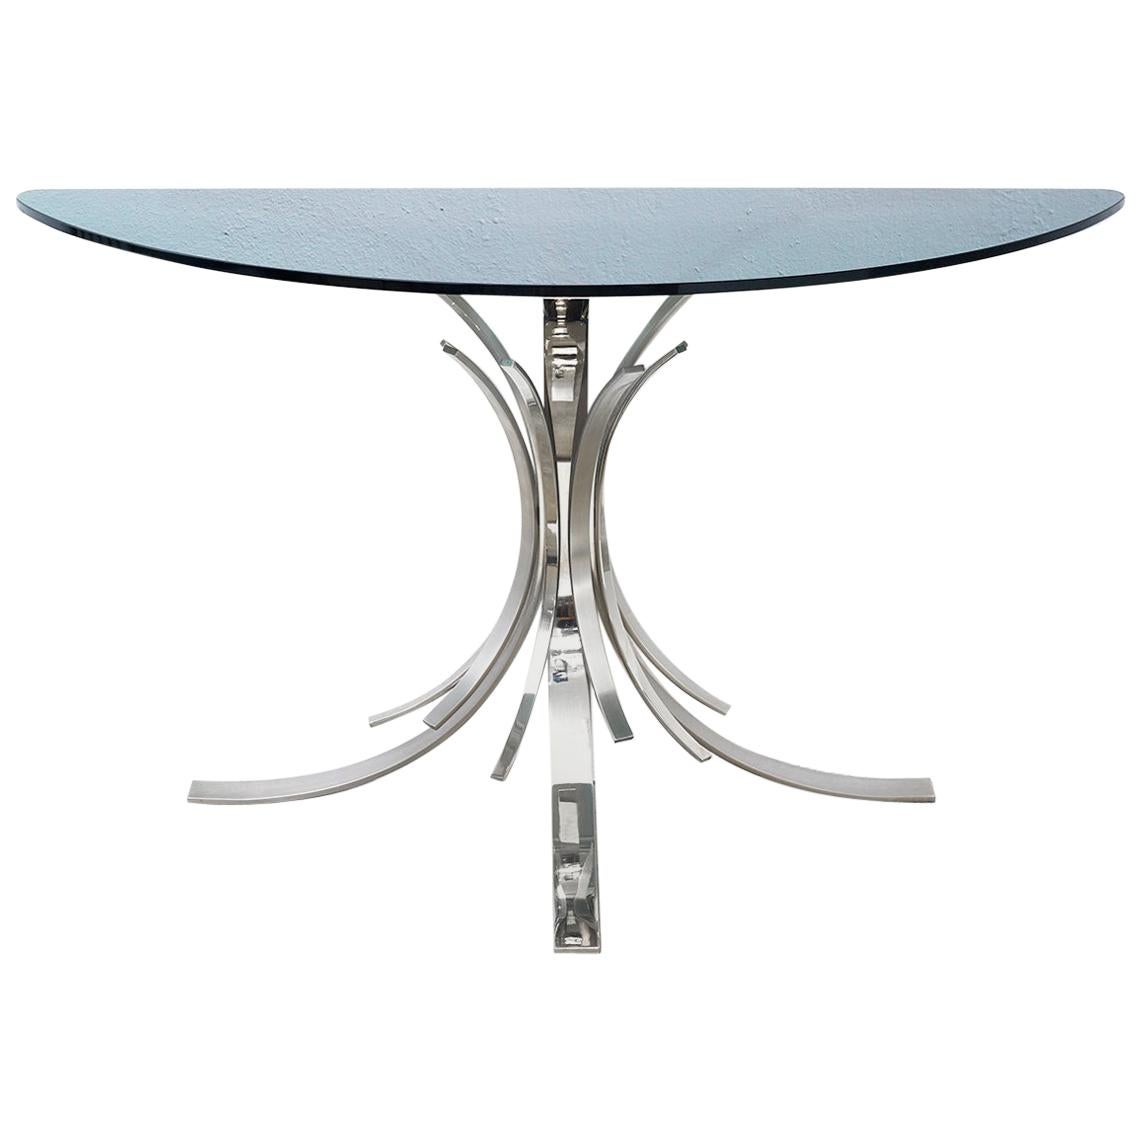  French design stainless steel console "Gerbe" by Maria Pergay, France c.1970